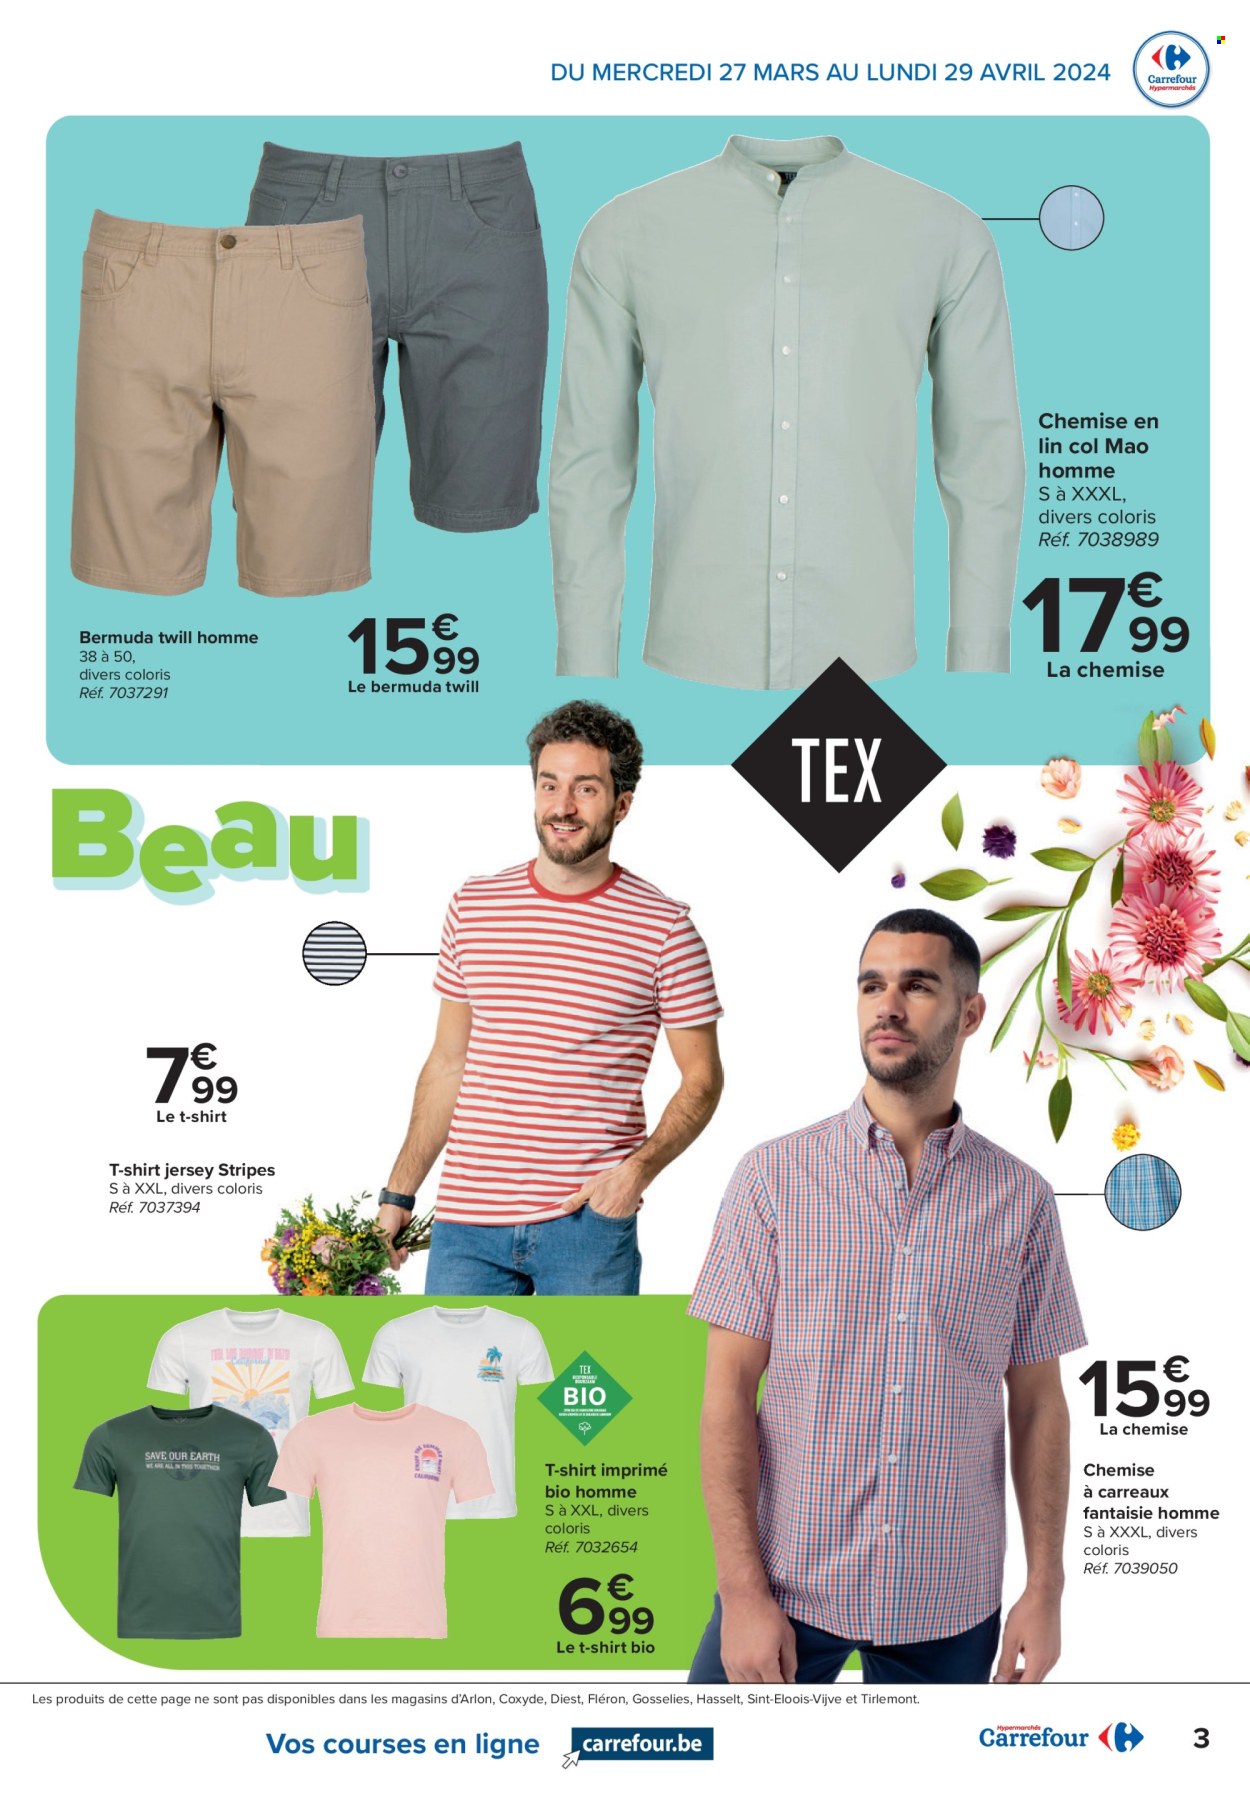 Catalogue Carrefour hypermarkt - 27.3.2024 - 29.4.2024. Page 3.